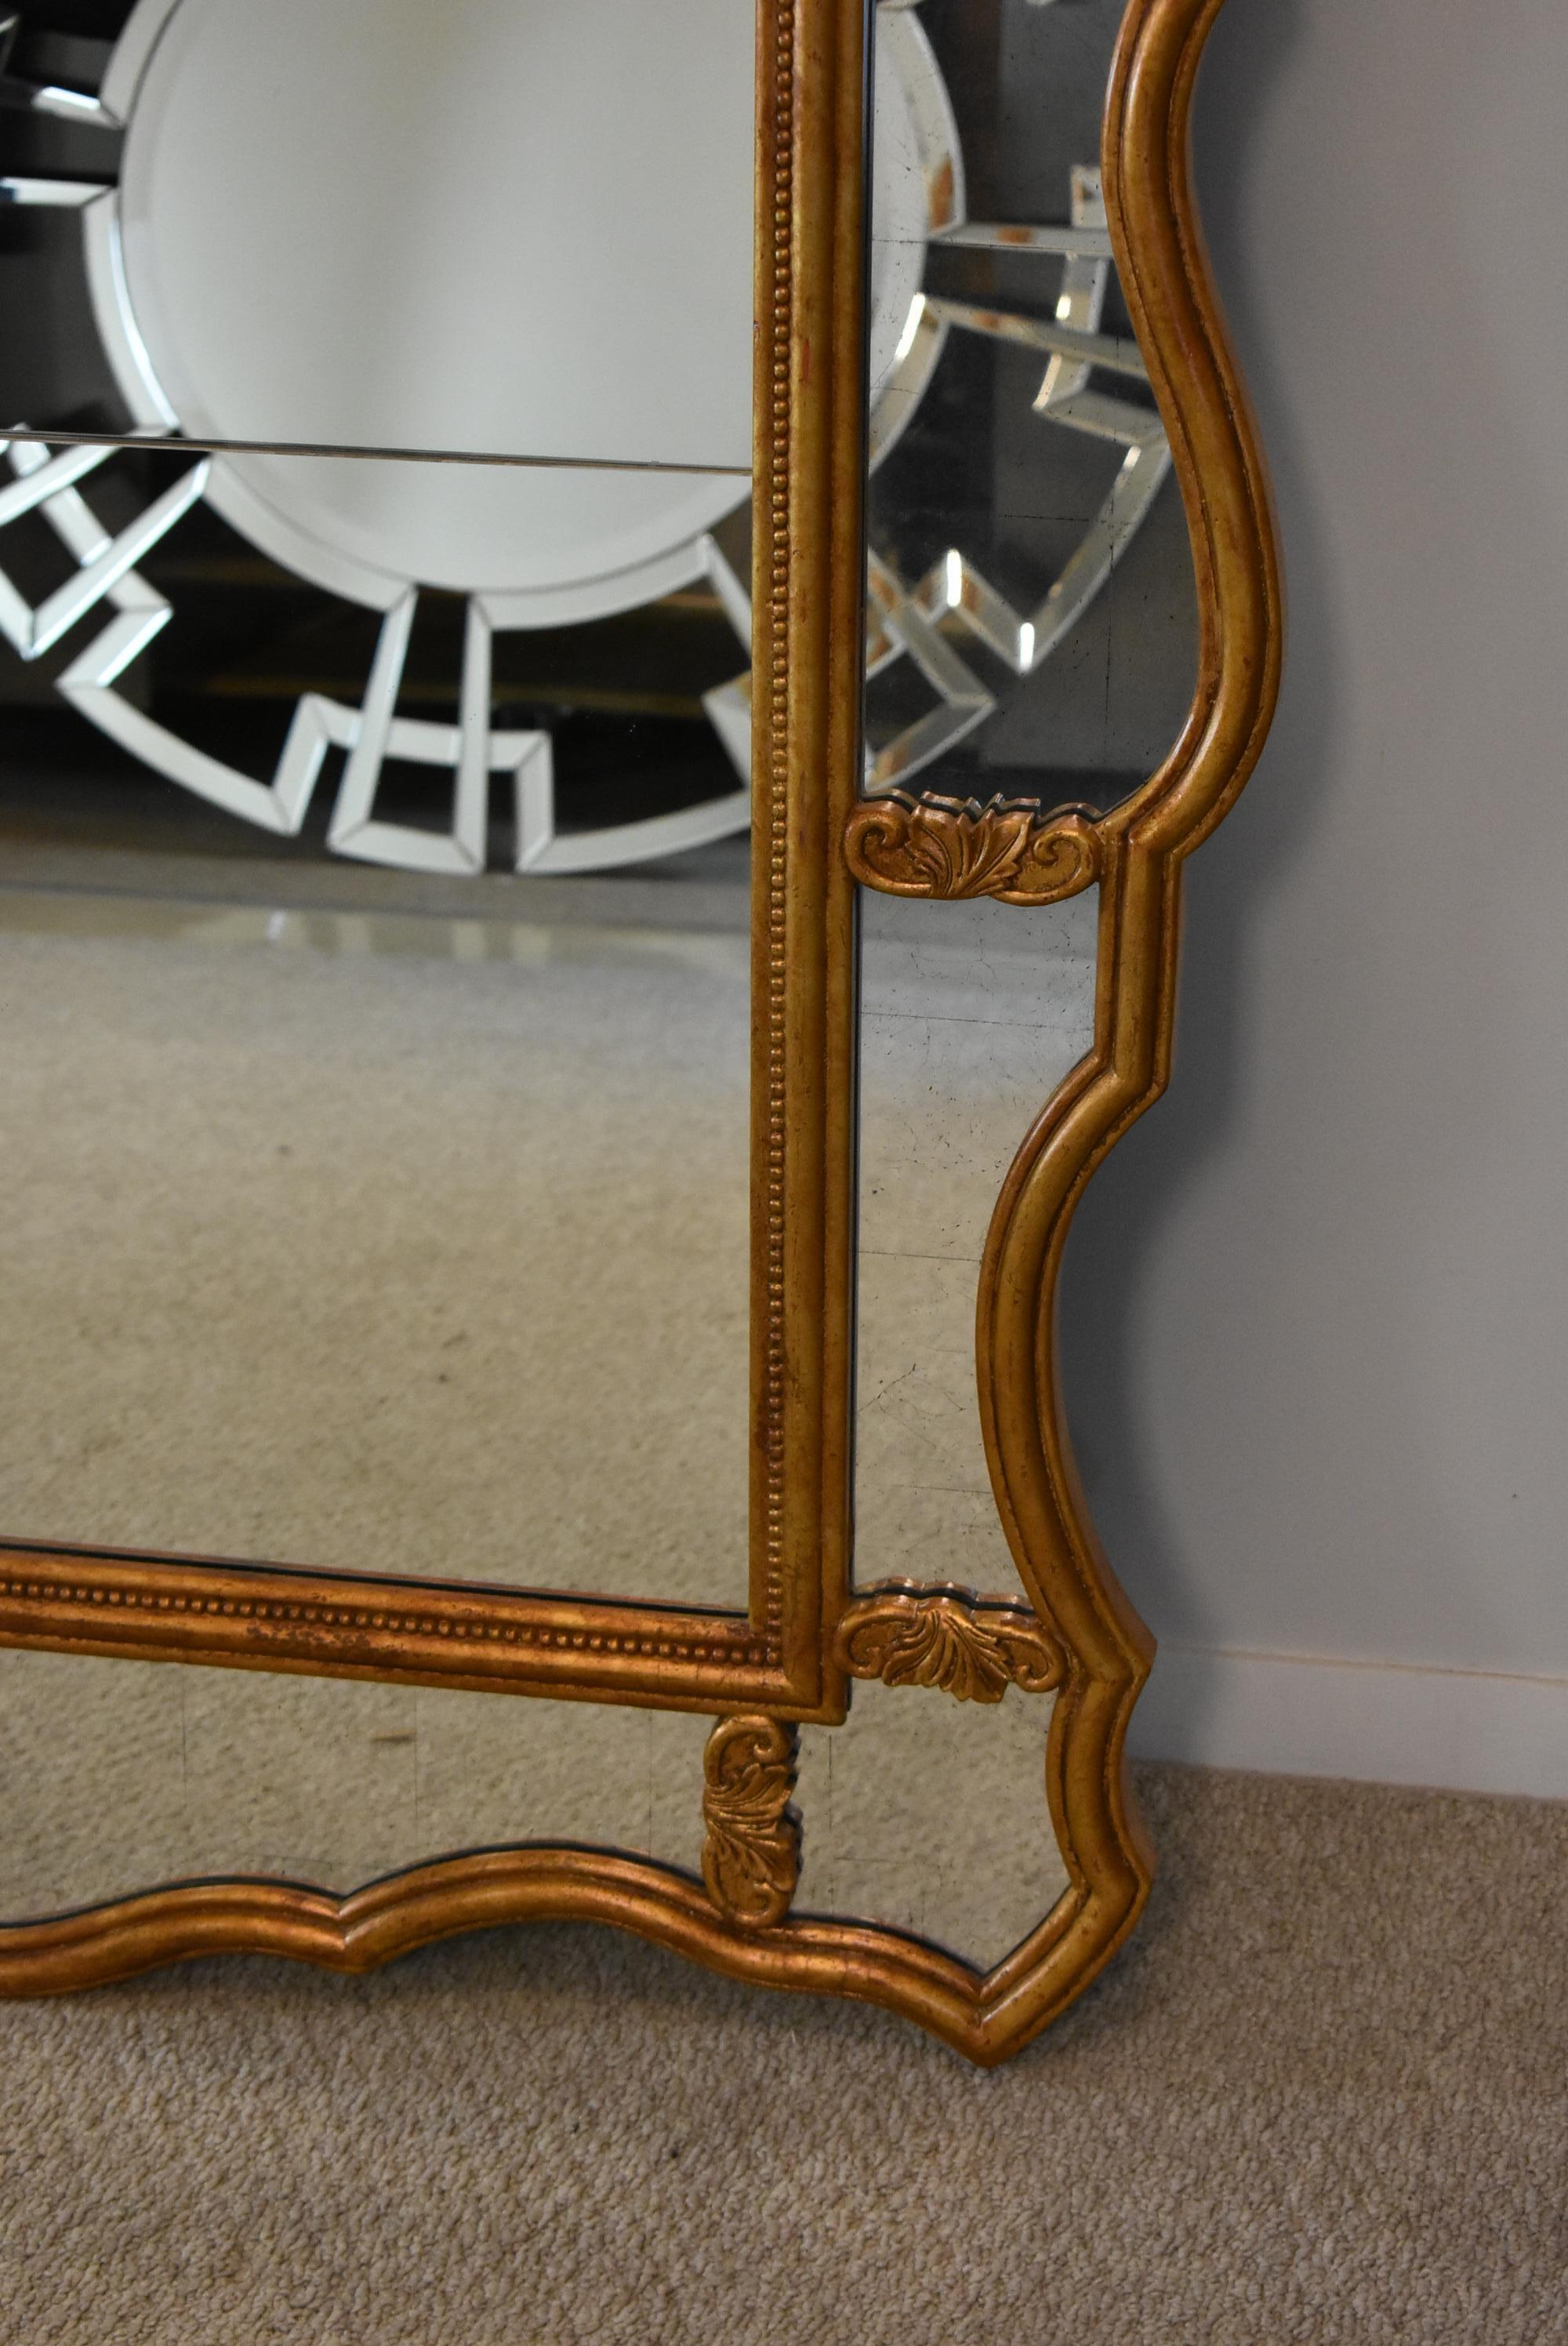 Gilded floor mirror by John Richard. Mirror features a serpentine arched top with a paneled boarder throughout. Each section has a distressed mirror with a thin beveled edge. Carved wood frame has a gilded bronze gold finish.